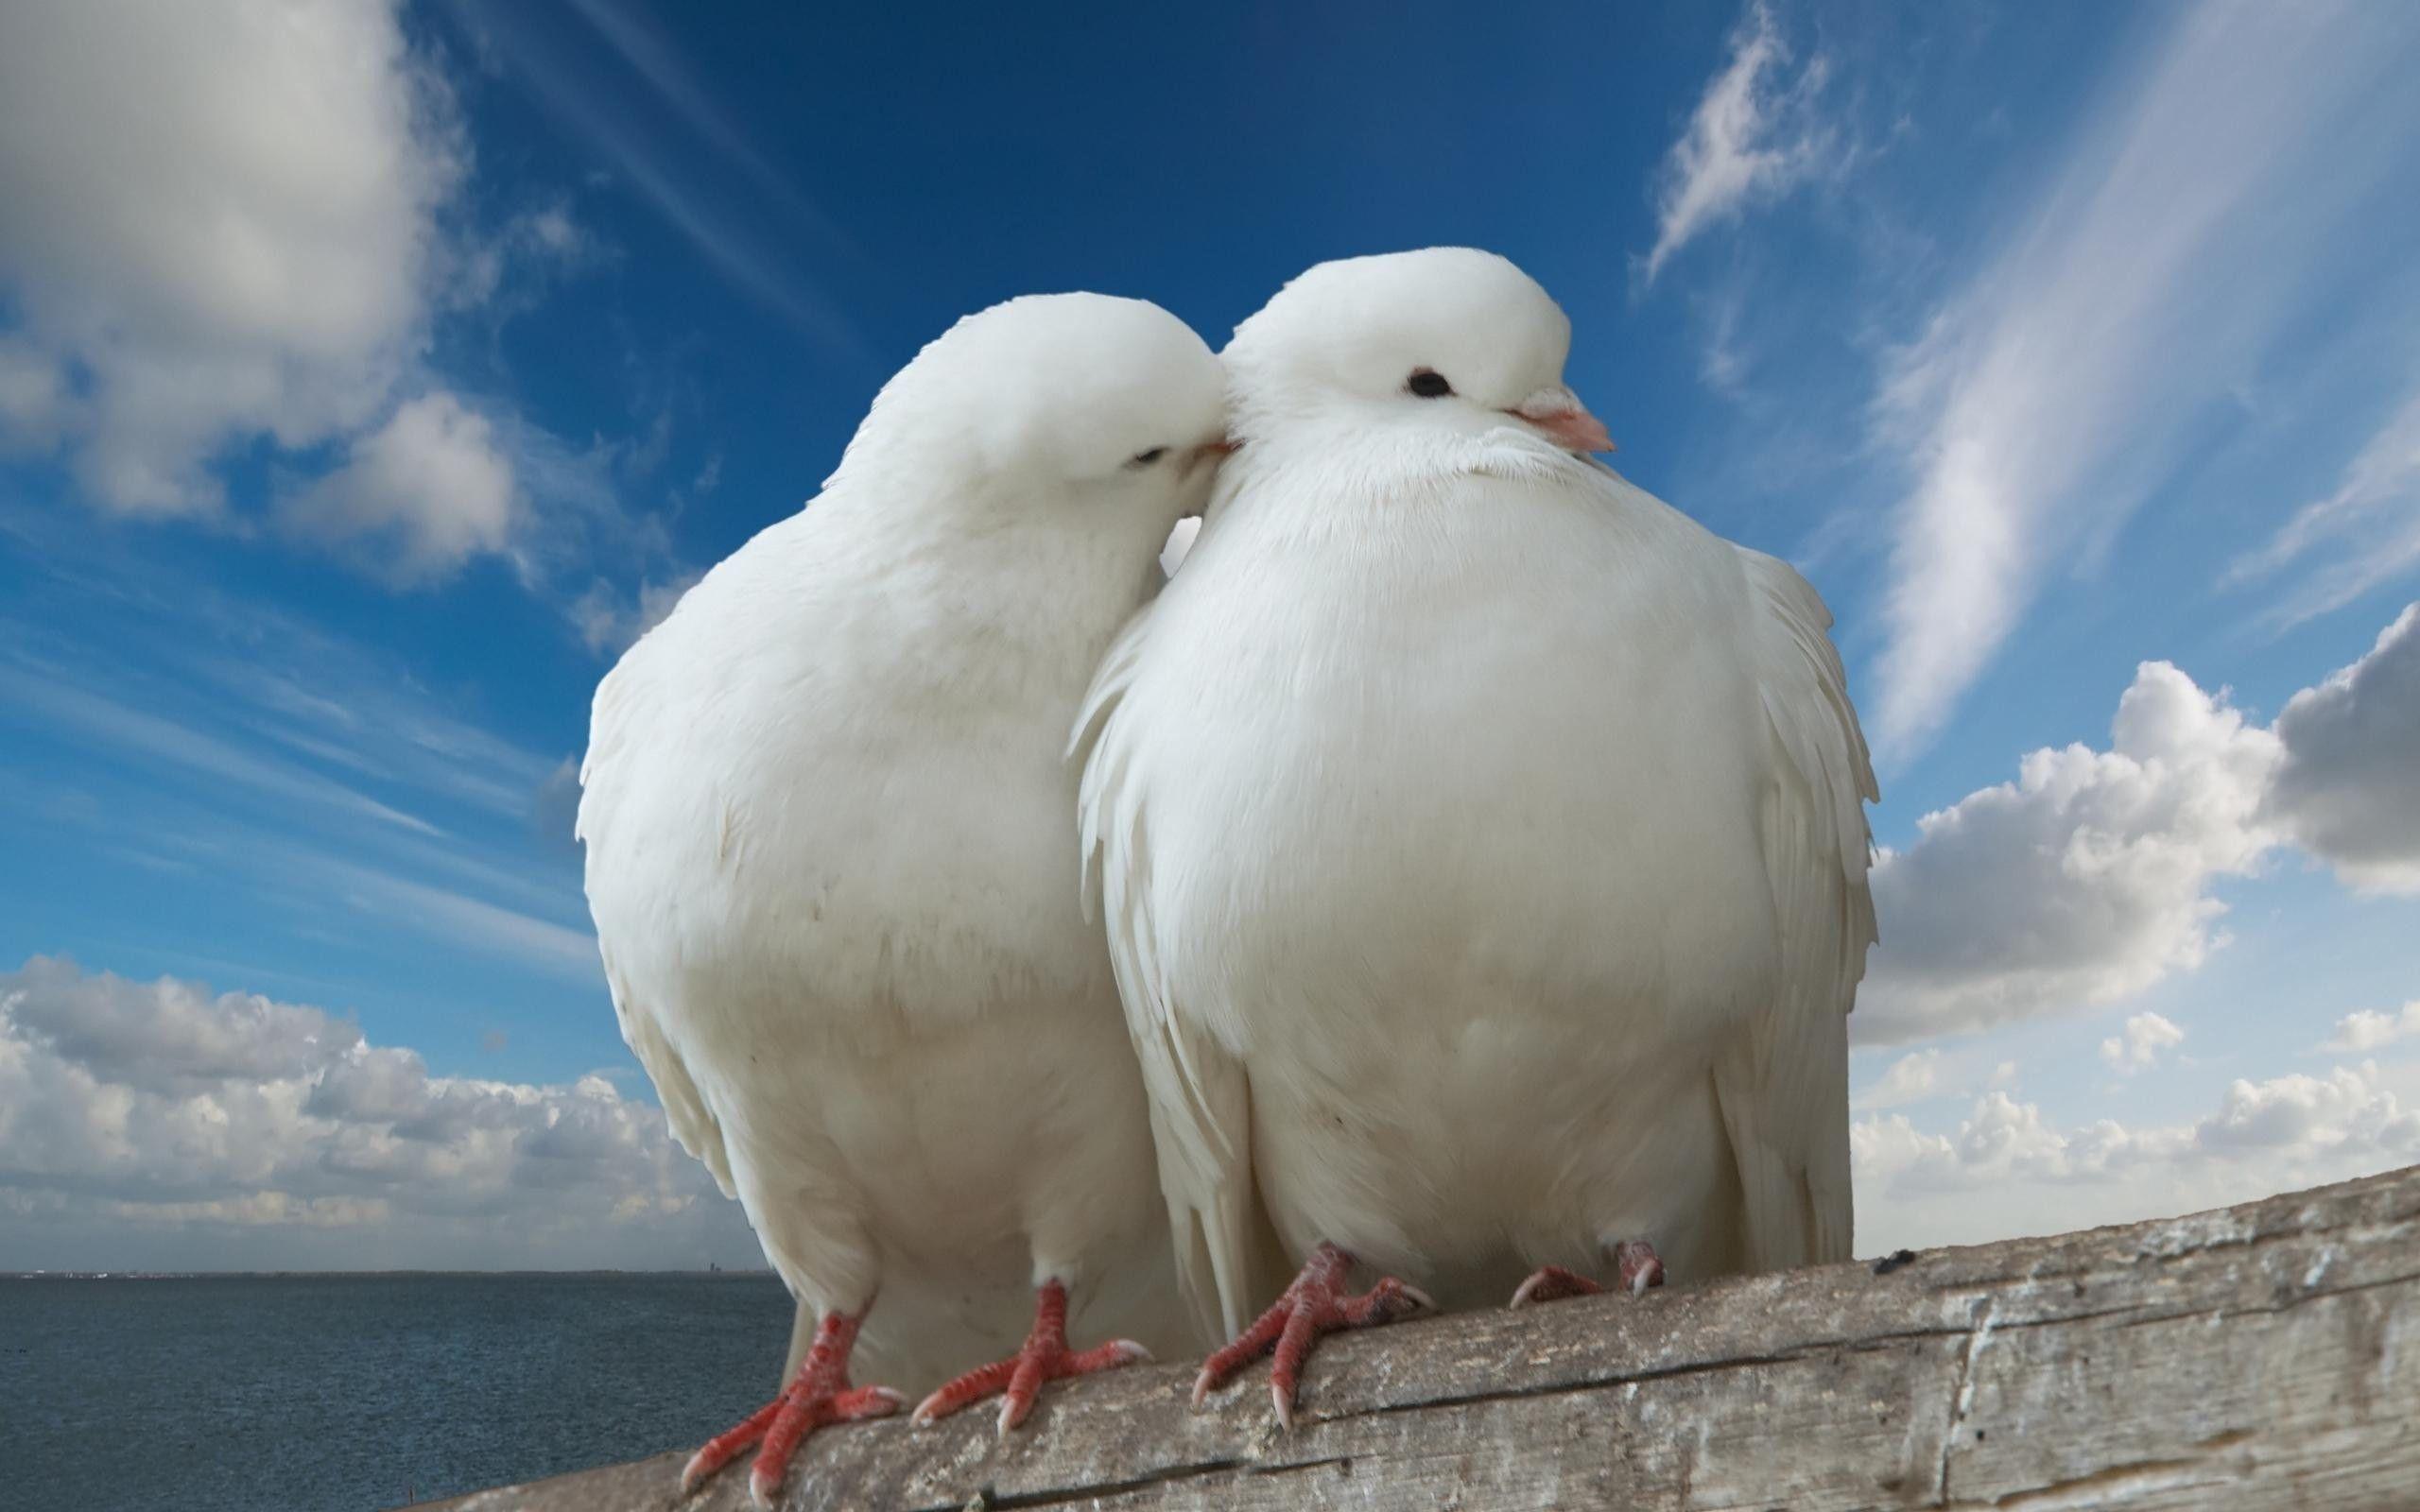 Doves HD Wallpaper Image Picture Photo Download